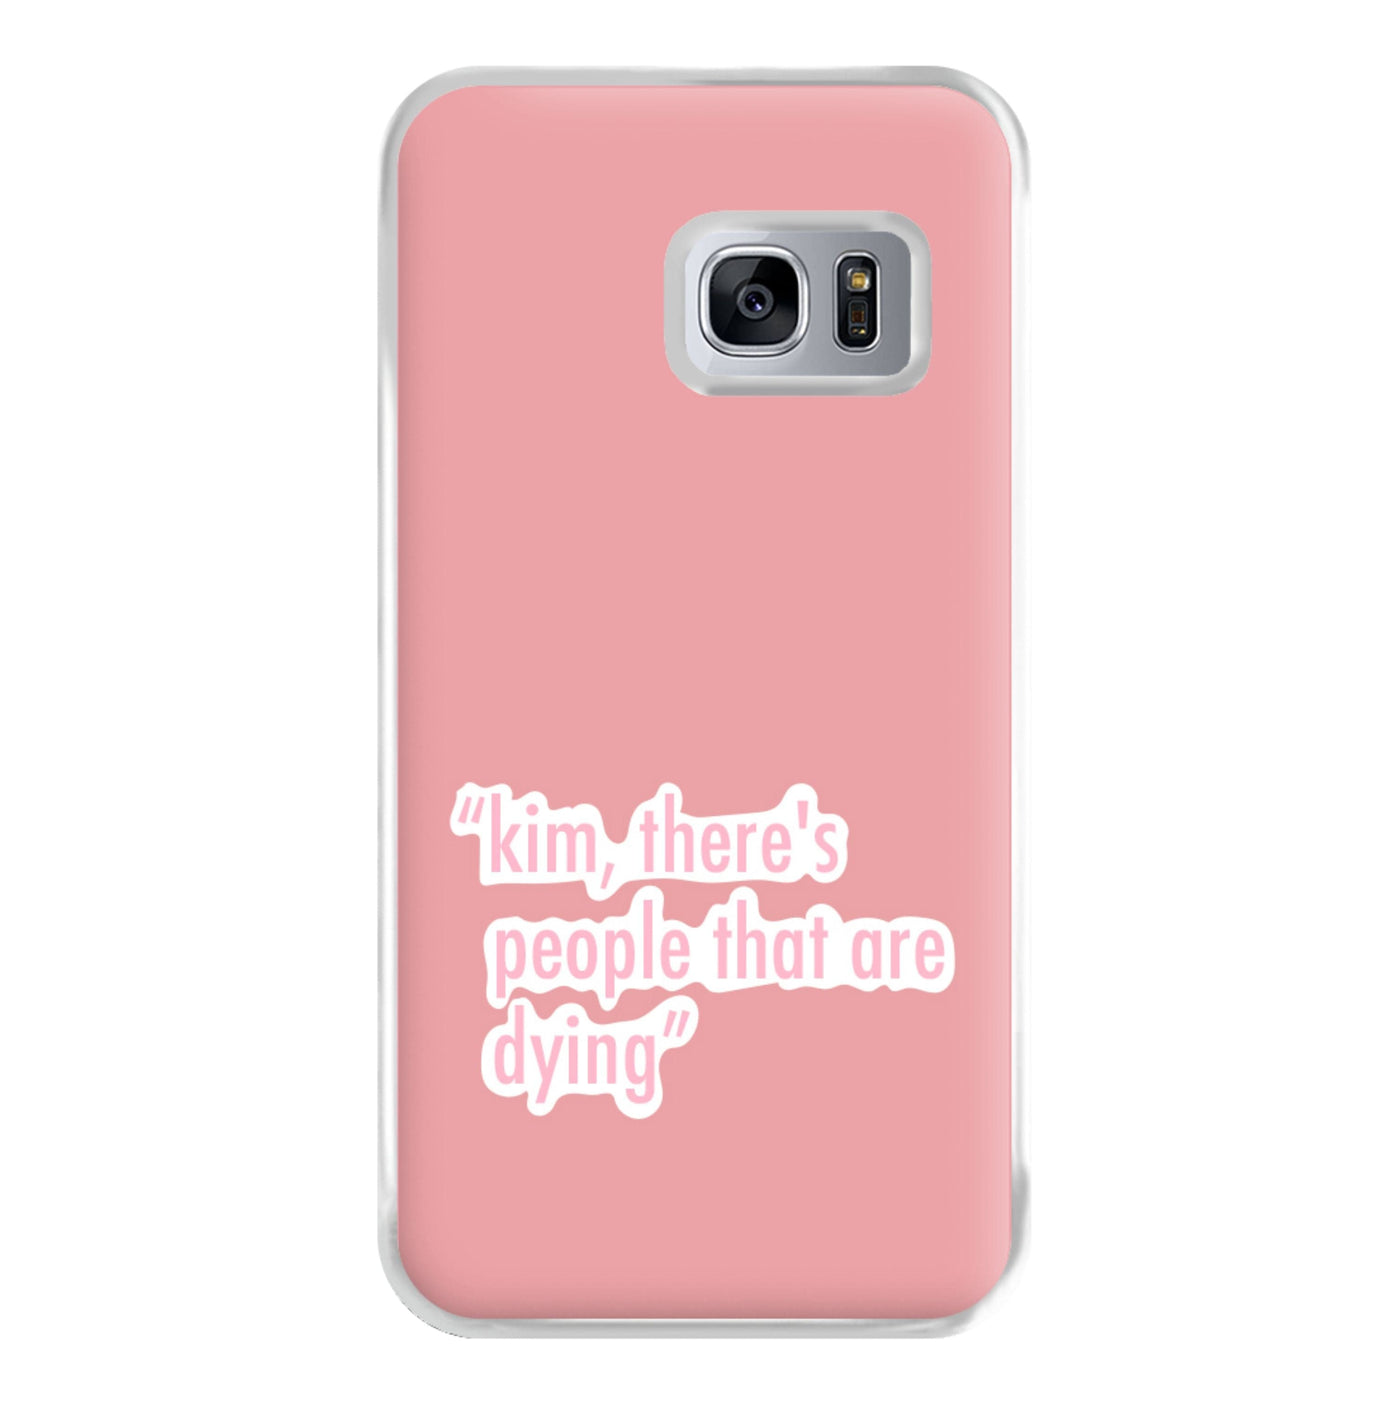 Kim, There's People That Are Dying - Kardashian Phone Case